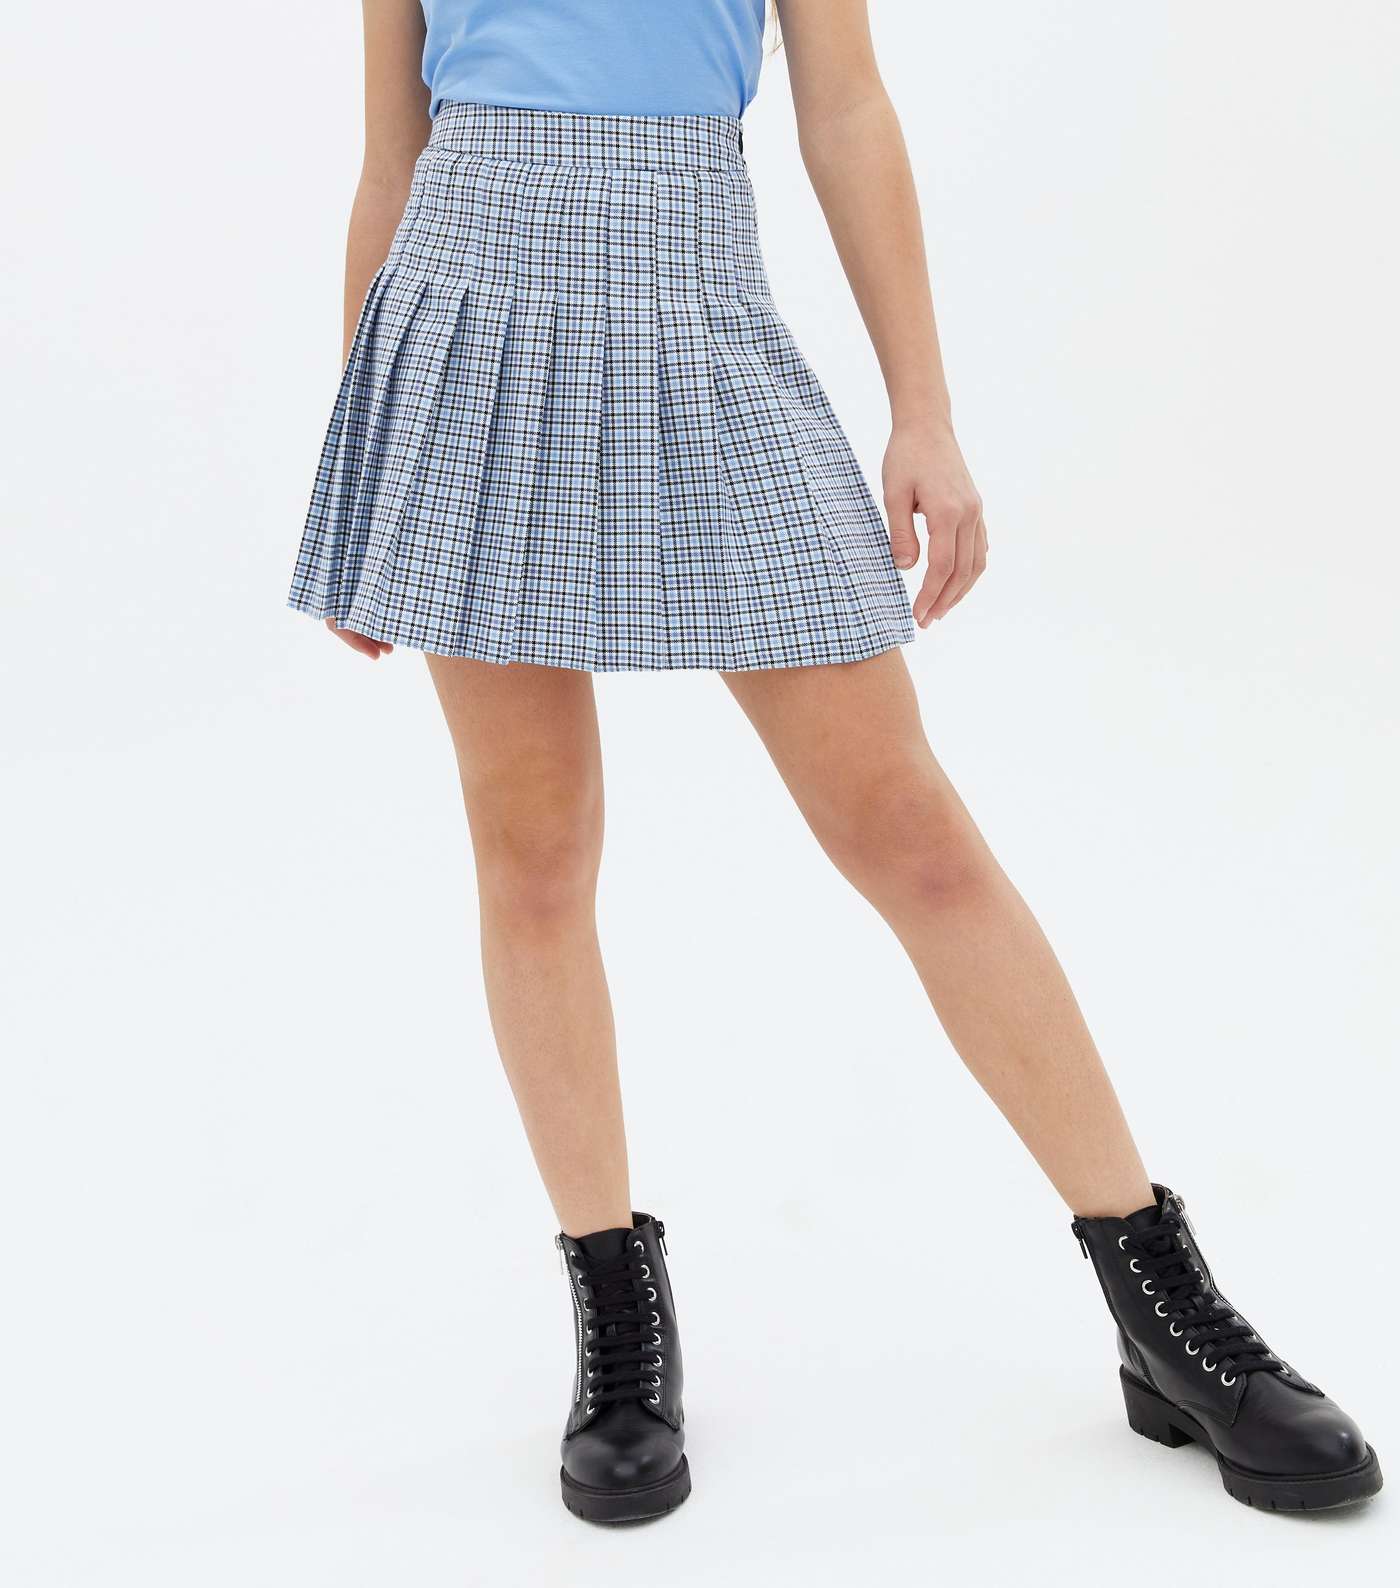 Girls Pale Blue Check Pleated Tennis Skirt Image 2